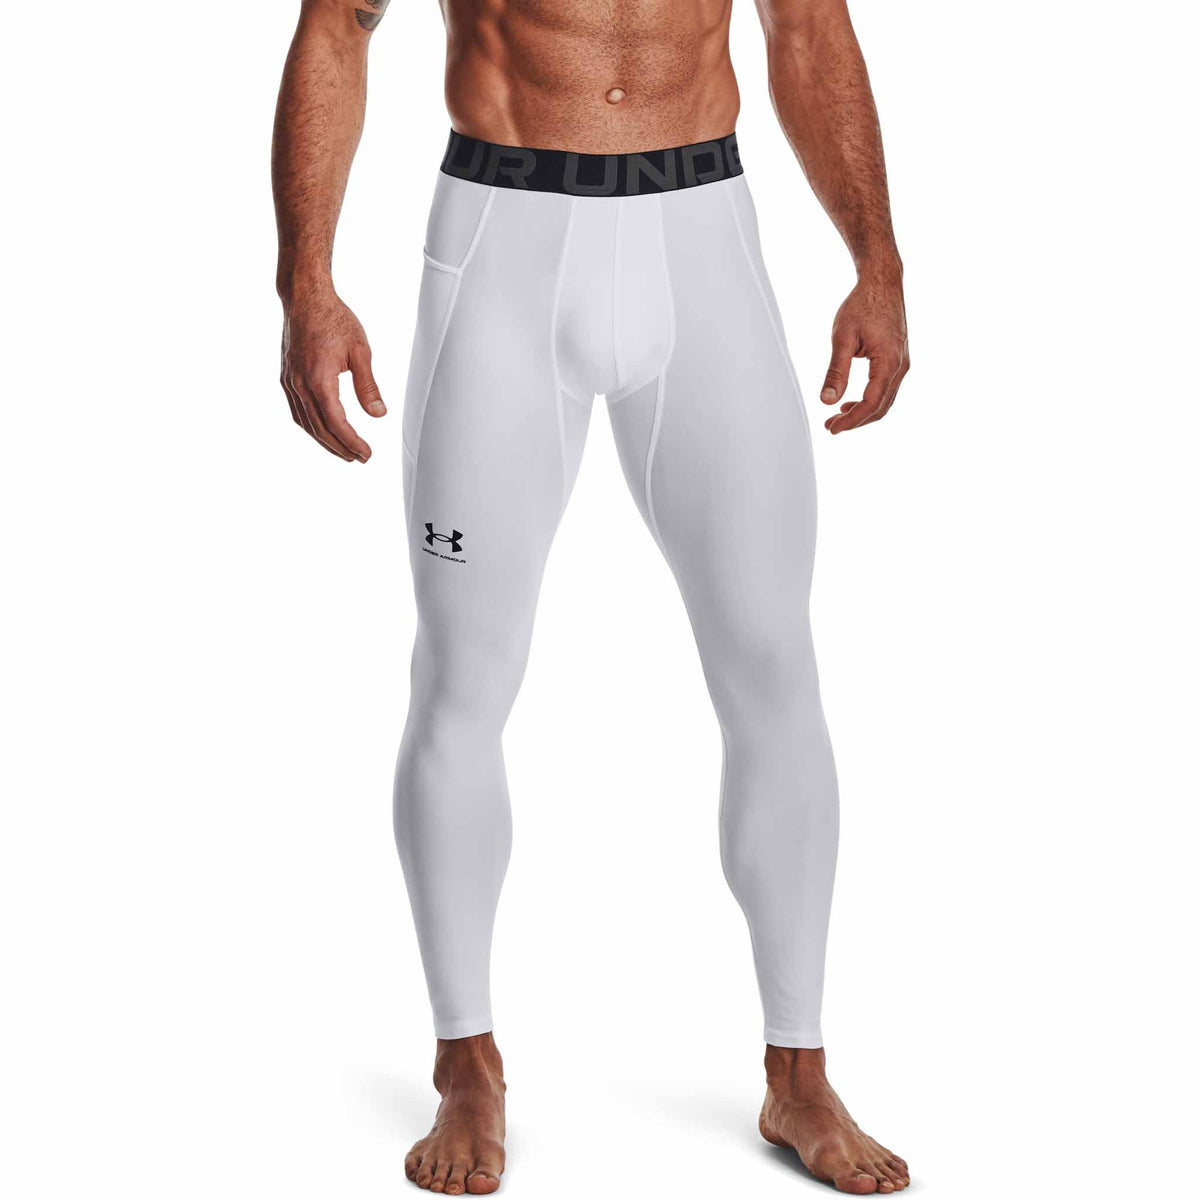 NWOT under armour xs compression leggings